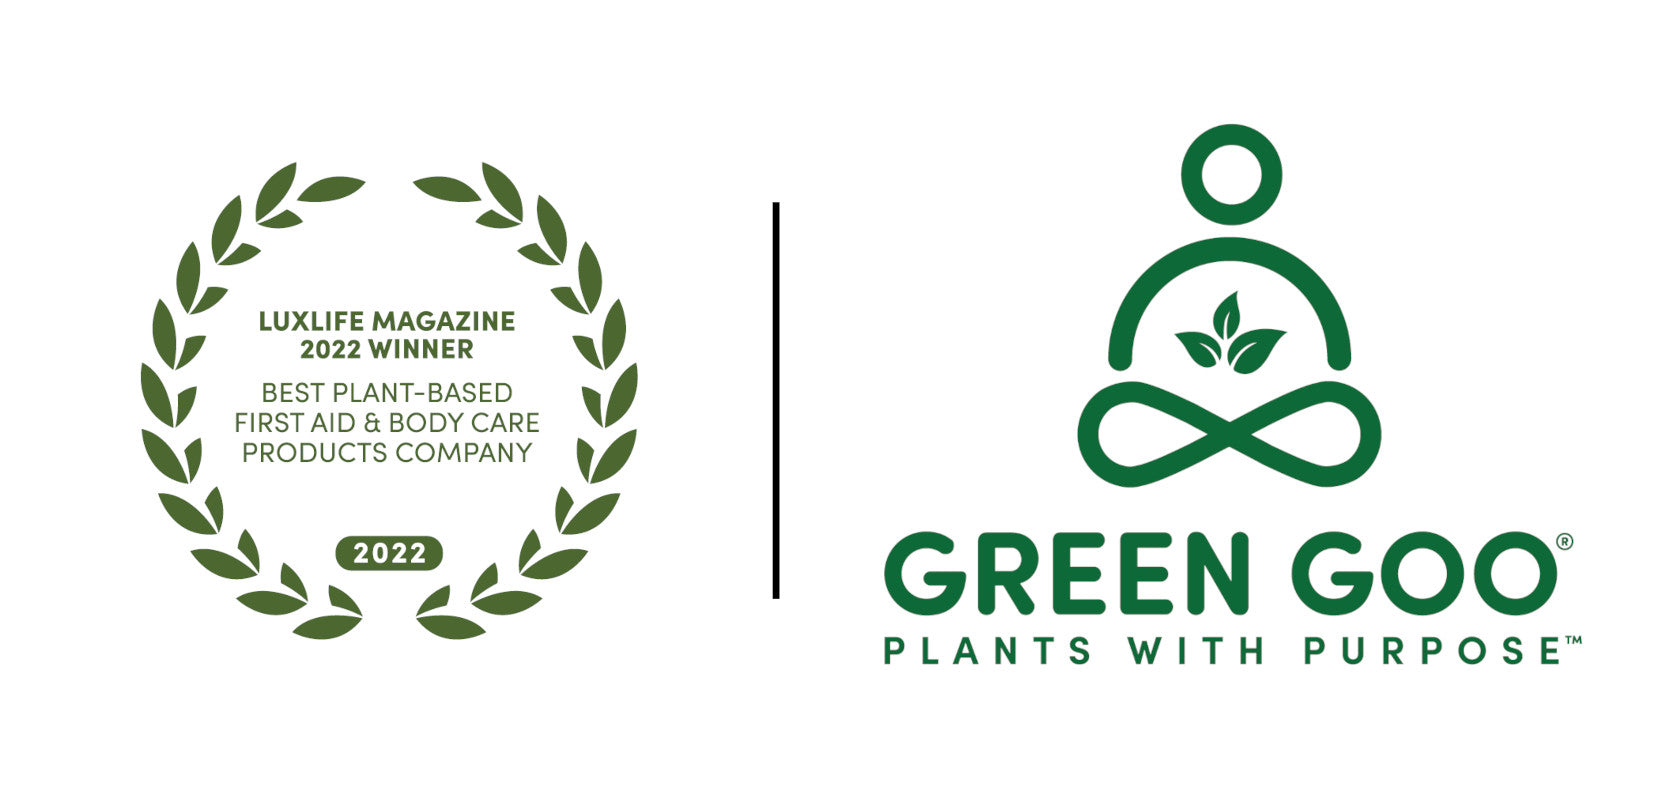 Green Goo GooRu logo lockup with LuxLife Award Badge: LuxLife Magazine 2022 Winner for Best Plant-Based First Aid & Body Care Products Company